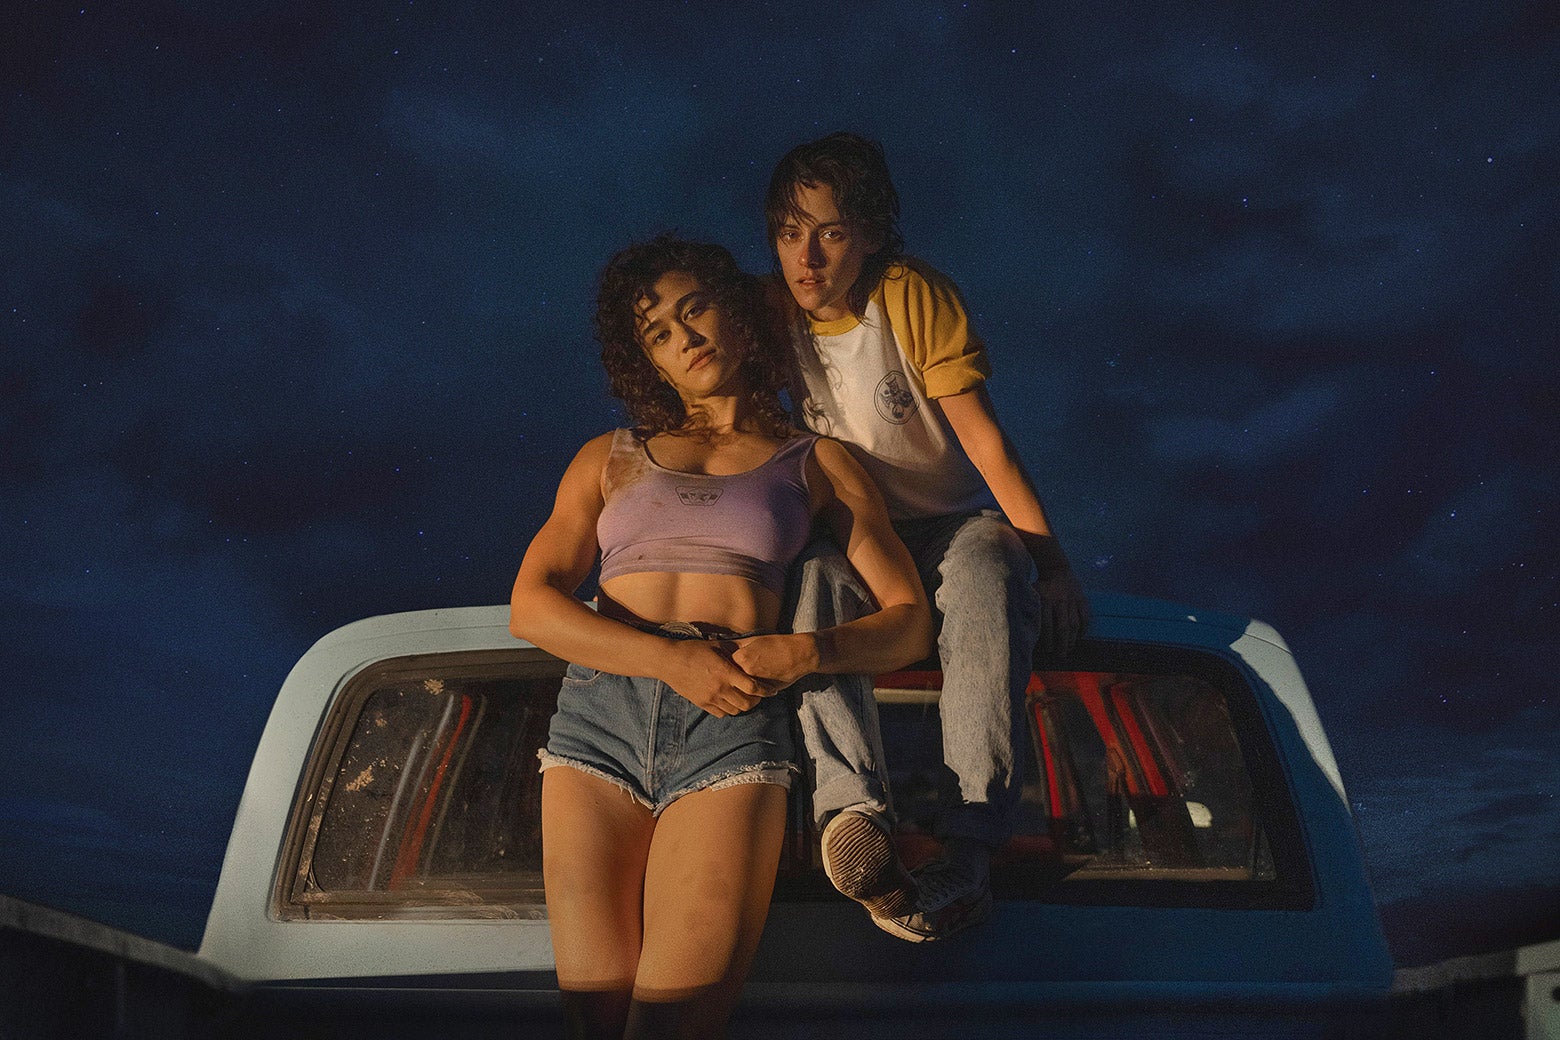 The two actresses sit in a truckbed, leaning against the cabin, against a backdrop of the night sky. O’Brian is ripped in Daisy Dukes and what looks like a sports bra. Stewart wears a raglan tee and jeans and smolders at the camera.